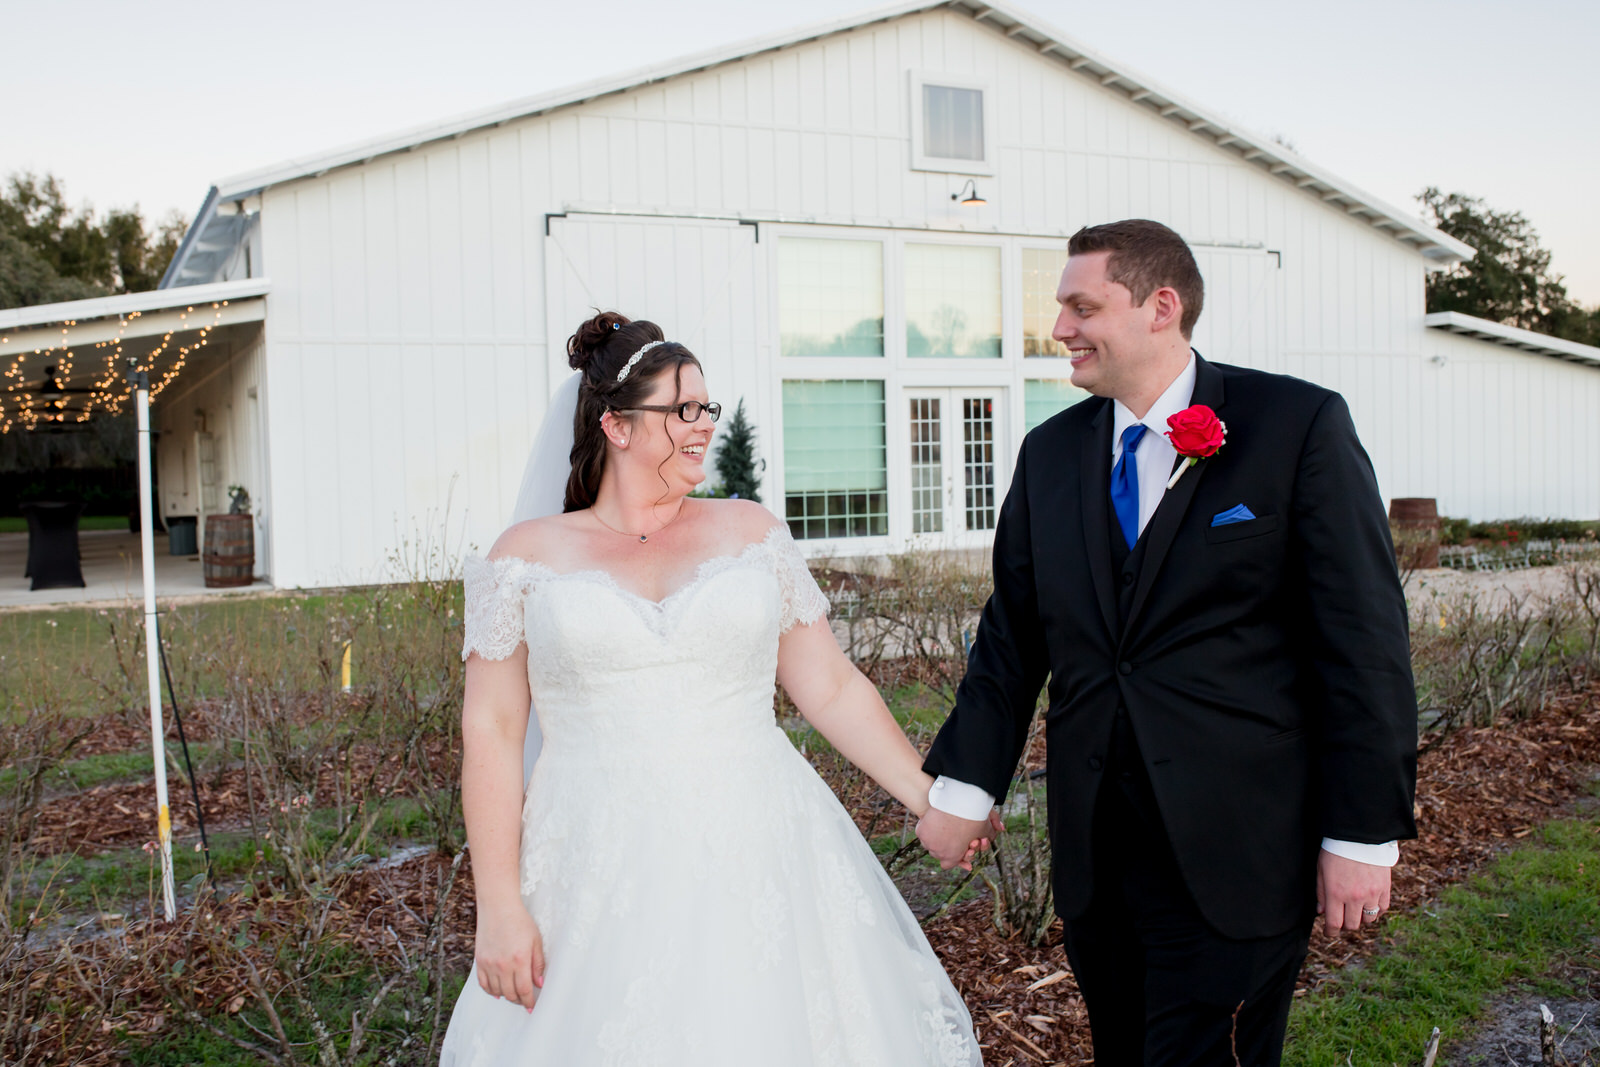 Jacob and Christin's wedding at EVER AFTER BLUEBERRY FARMS